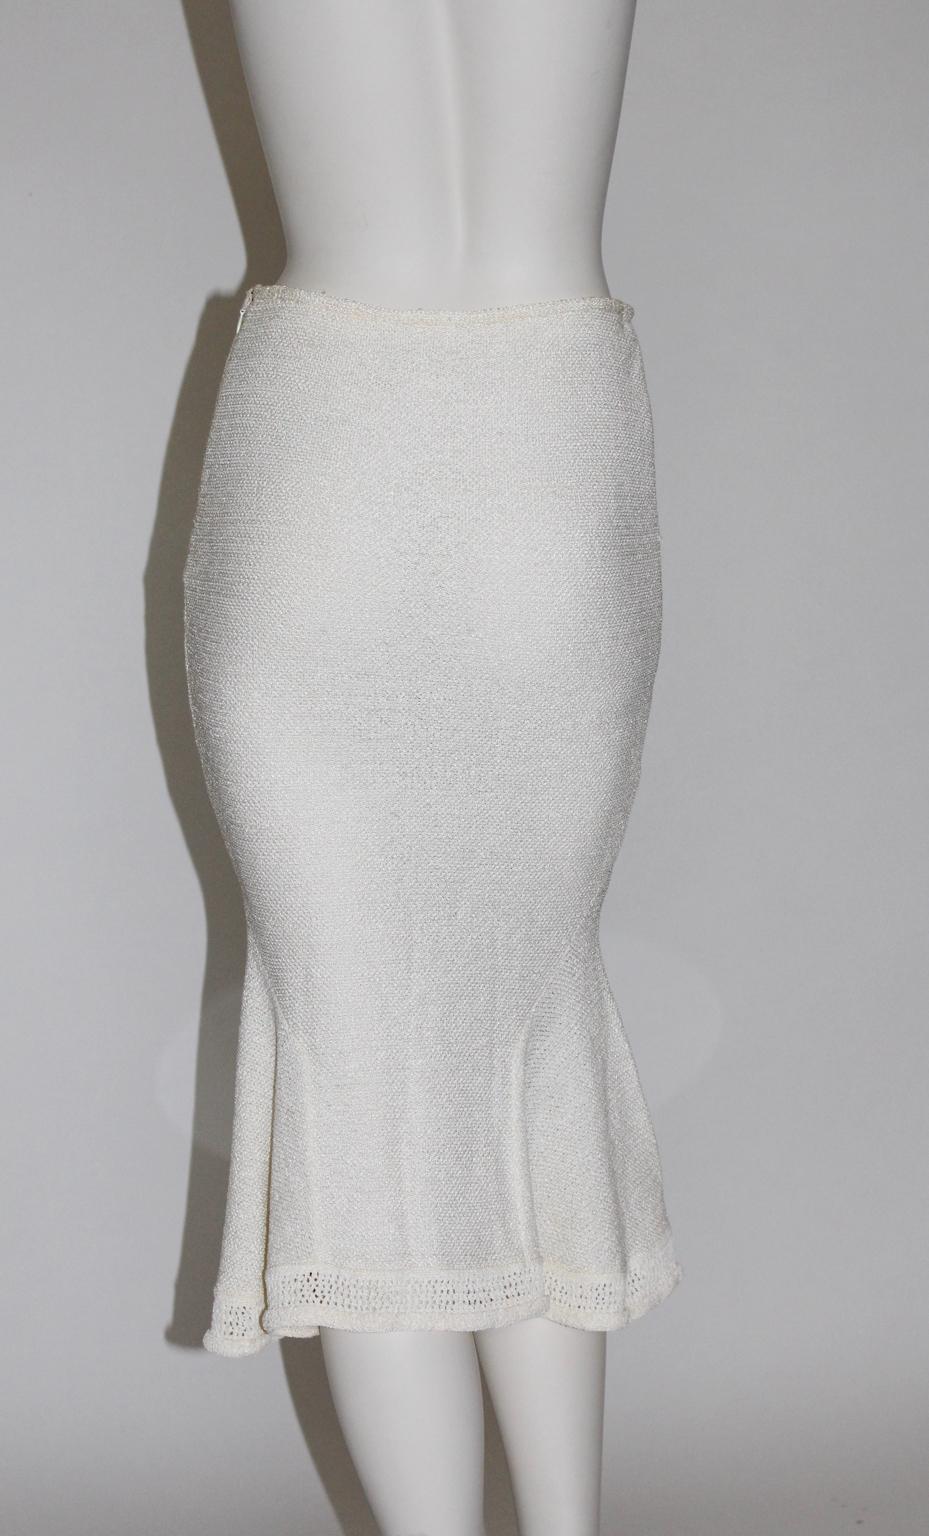 John Galliano Paris Off White Vintage Knit Viscose Pencil Skirt Peplum 1990s  In Good Condition For Sale In Vienna, AT